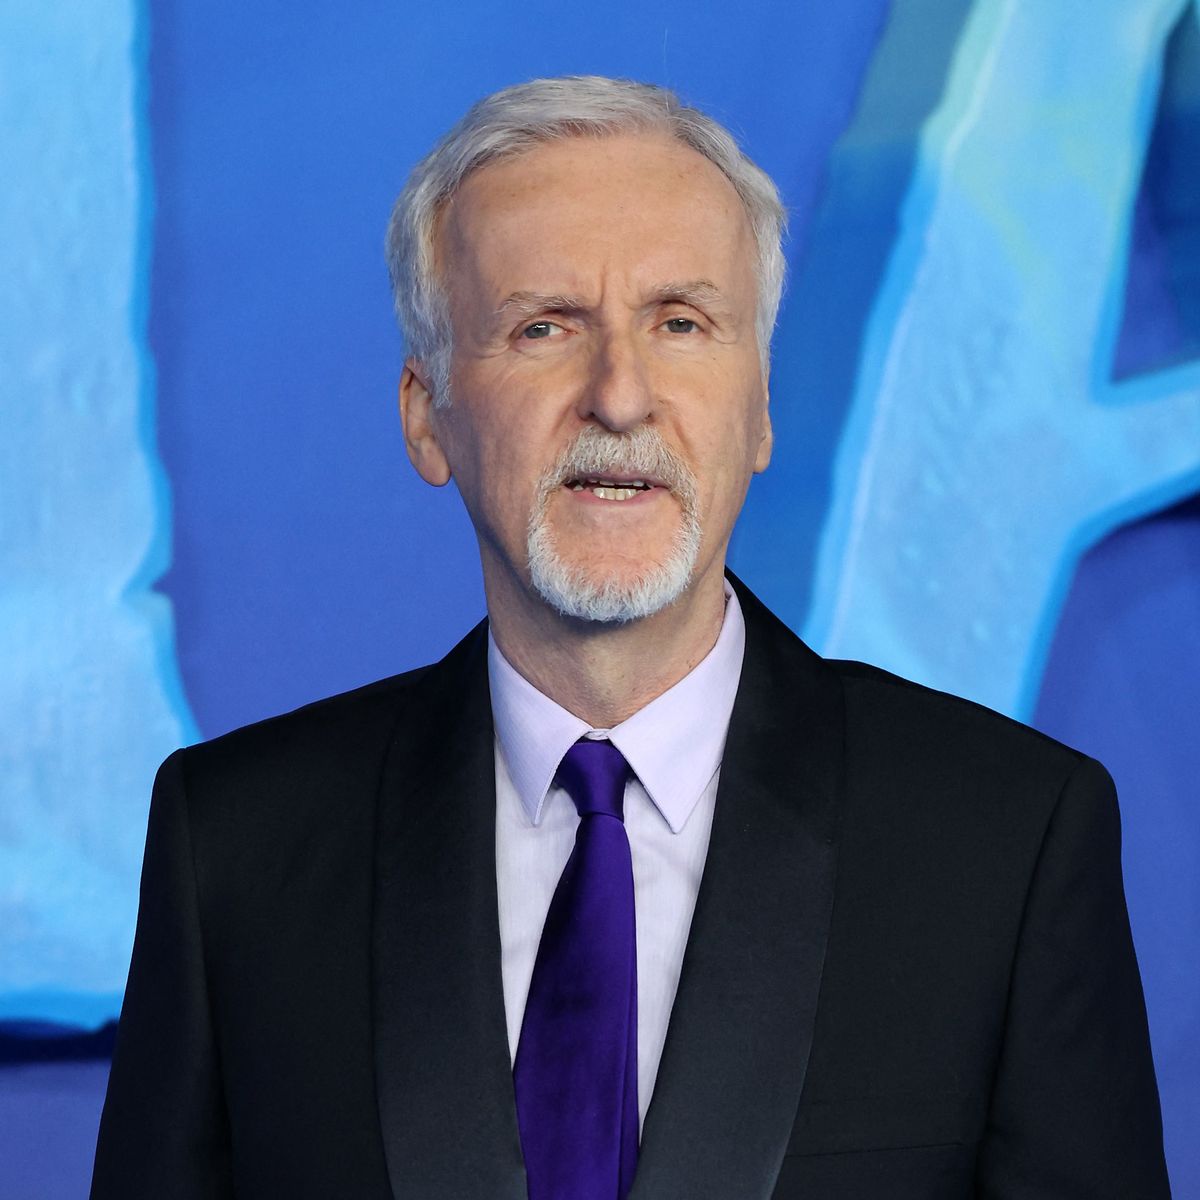 It's my kind of film”: James Cameron Disgusted With the Academy